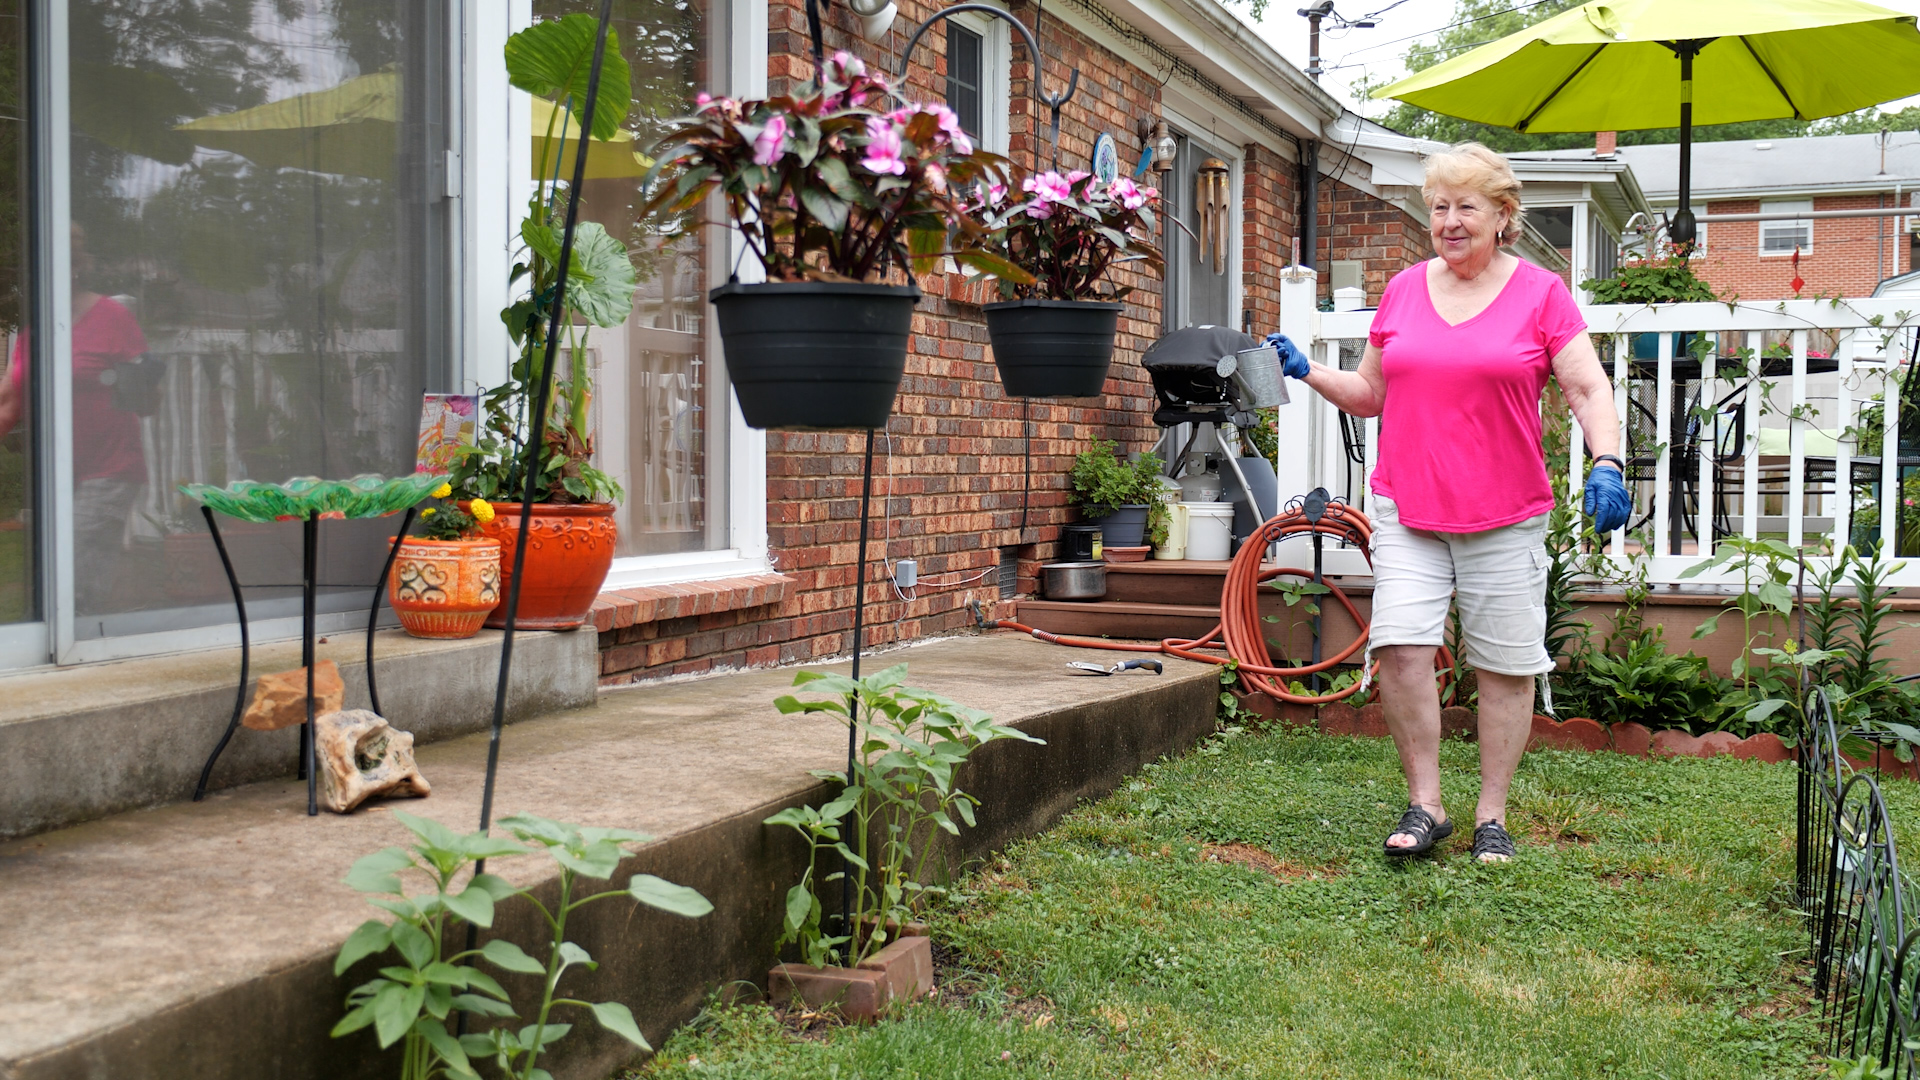 Sandra Exon is back to gardening after a knee replacement surgery at Phelps Health.